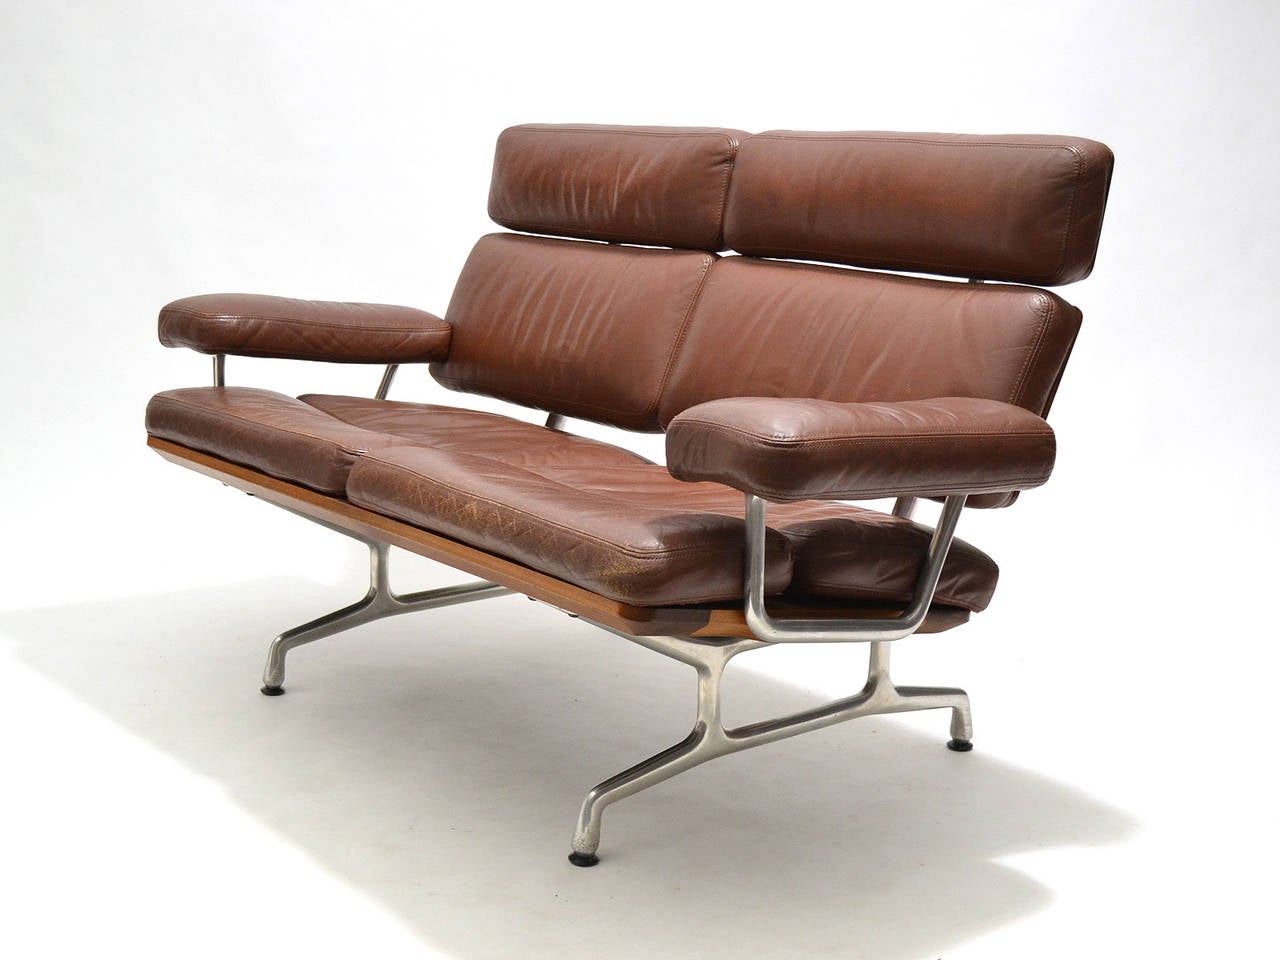 Late 20th Century Eames Teak and Leather Sofa by Herman Miller